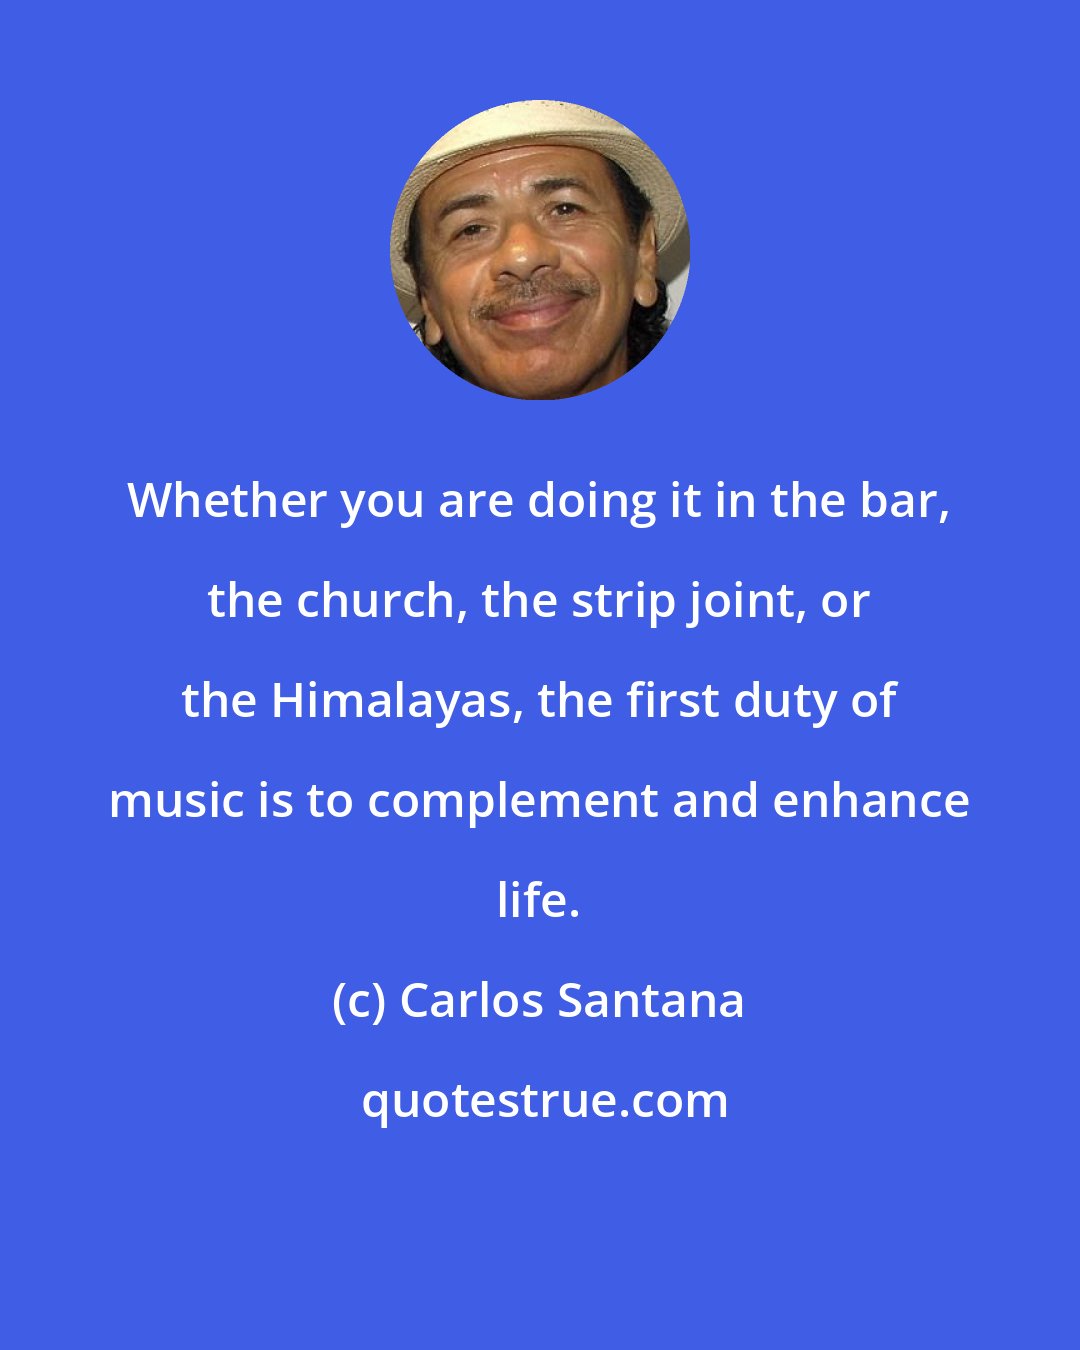 Carlos Santana: Whether you are doing it in the bar, the church, the strip joint, or the Himalayas, the first duty of music is to complement and enhance life.